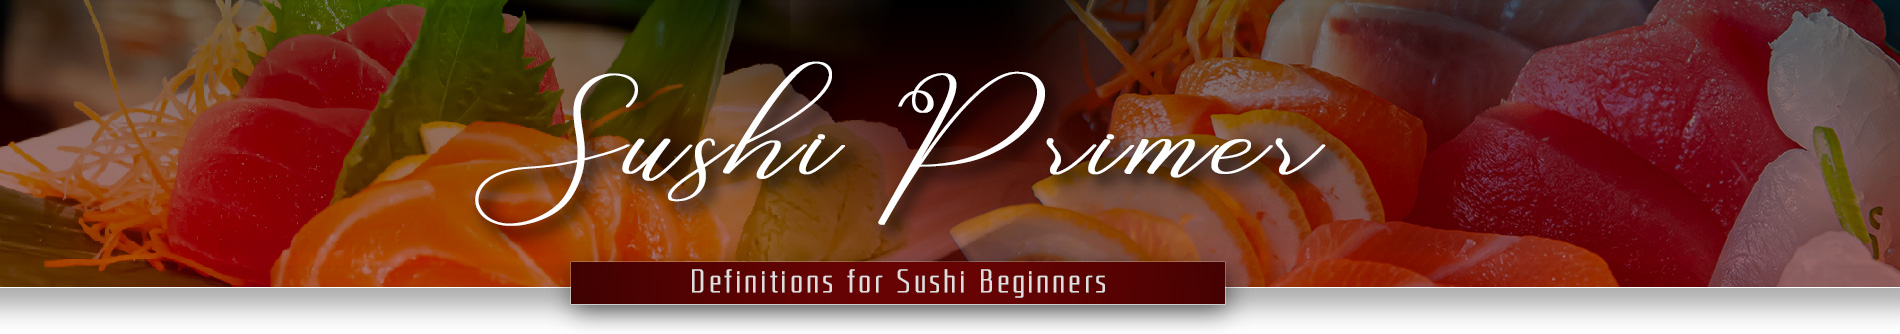 Definitions for Sushi Beginners